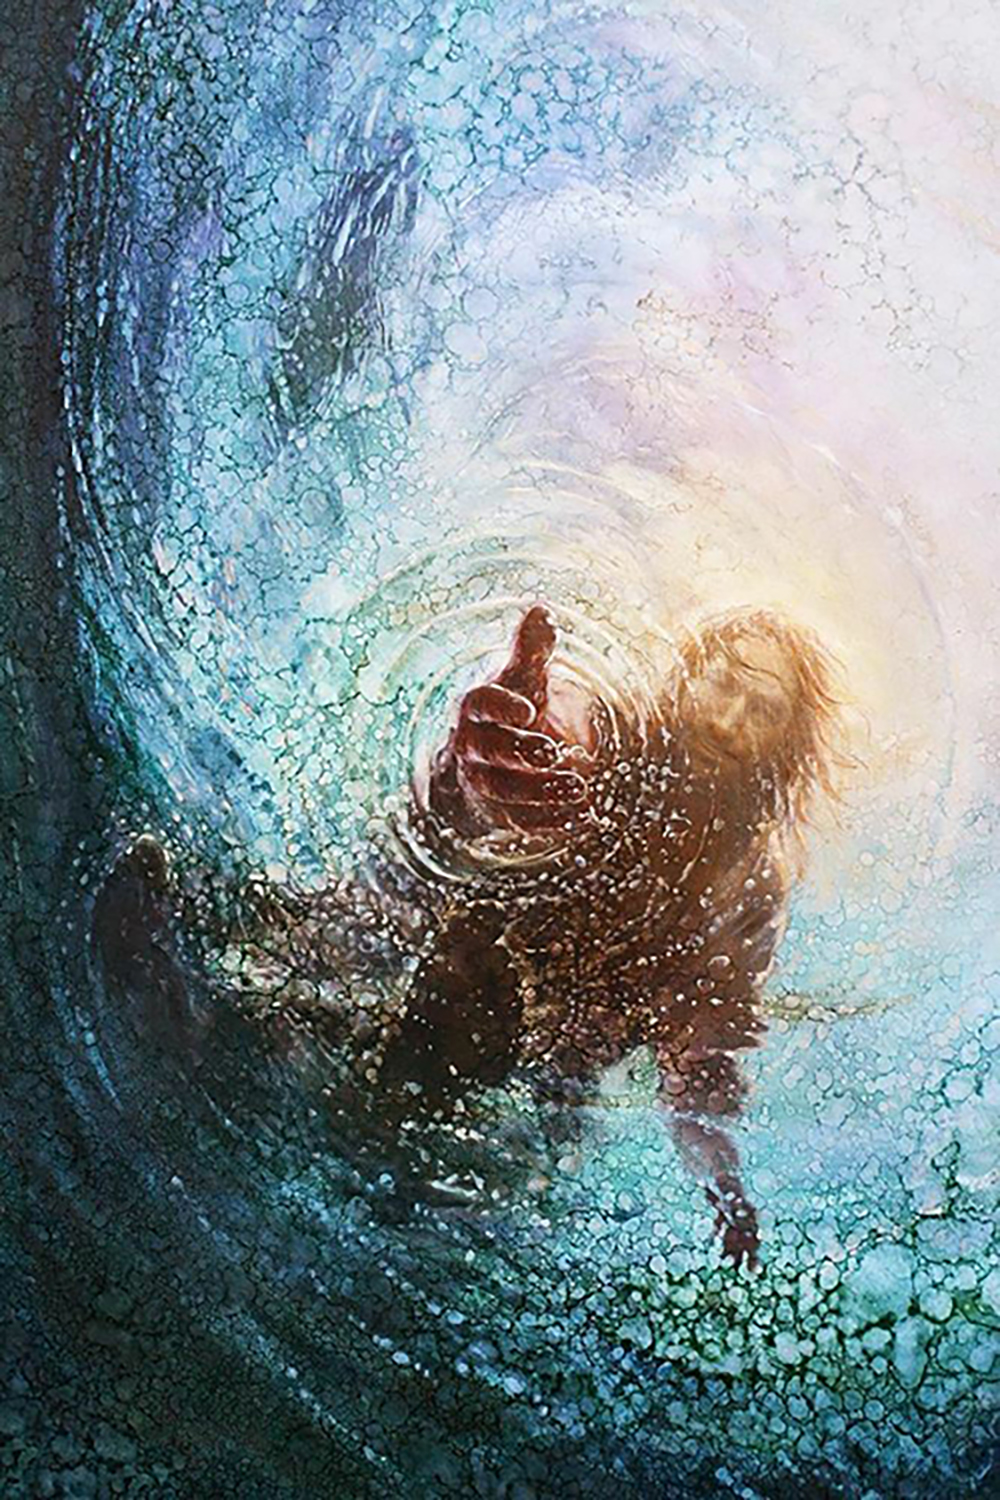 

Jesus Christ Reaching Hand into the Water Home Decor Oil Painting On Canvas HD-Print Wall Art Picture Customization is acceptable 21061216